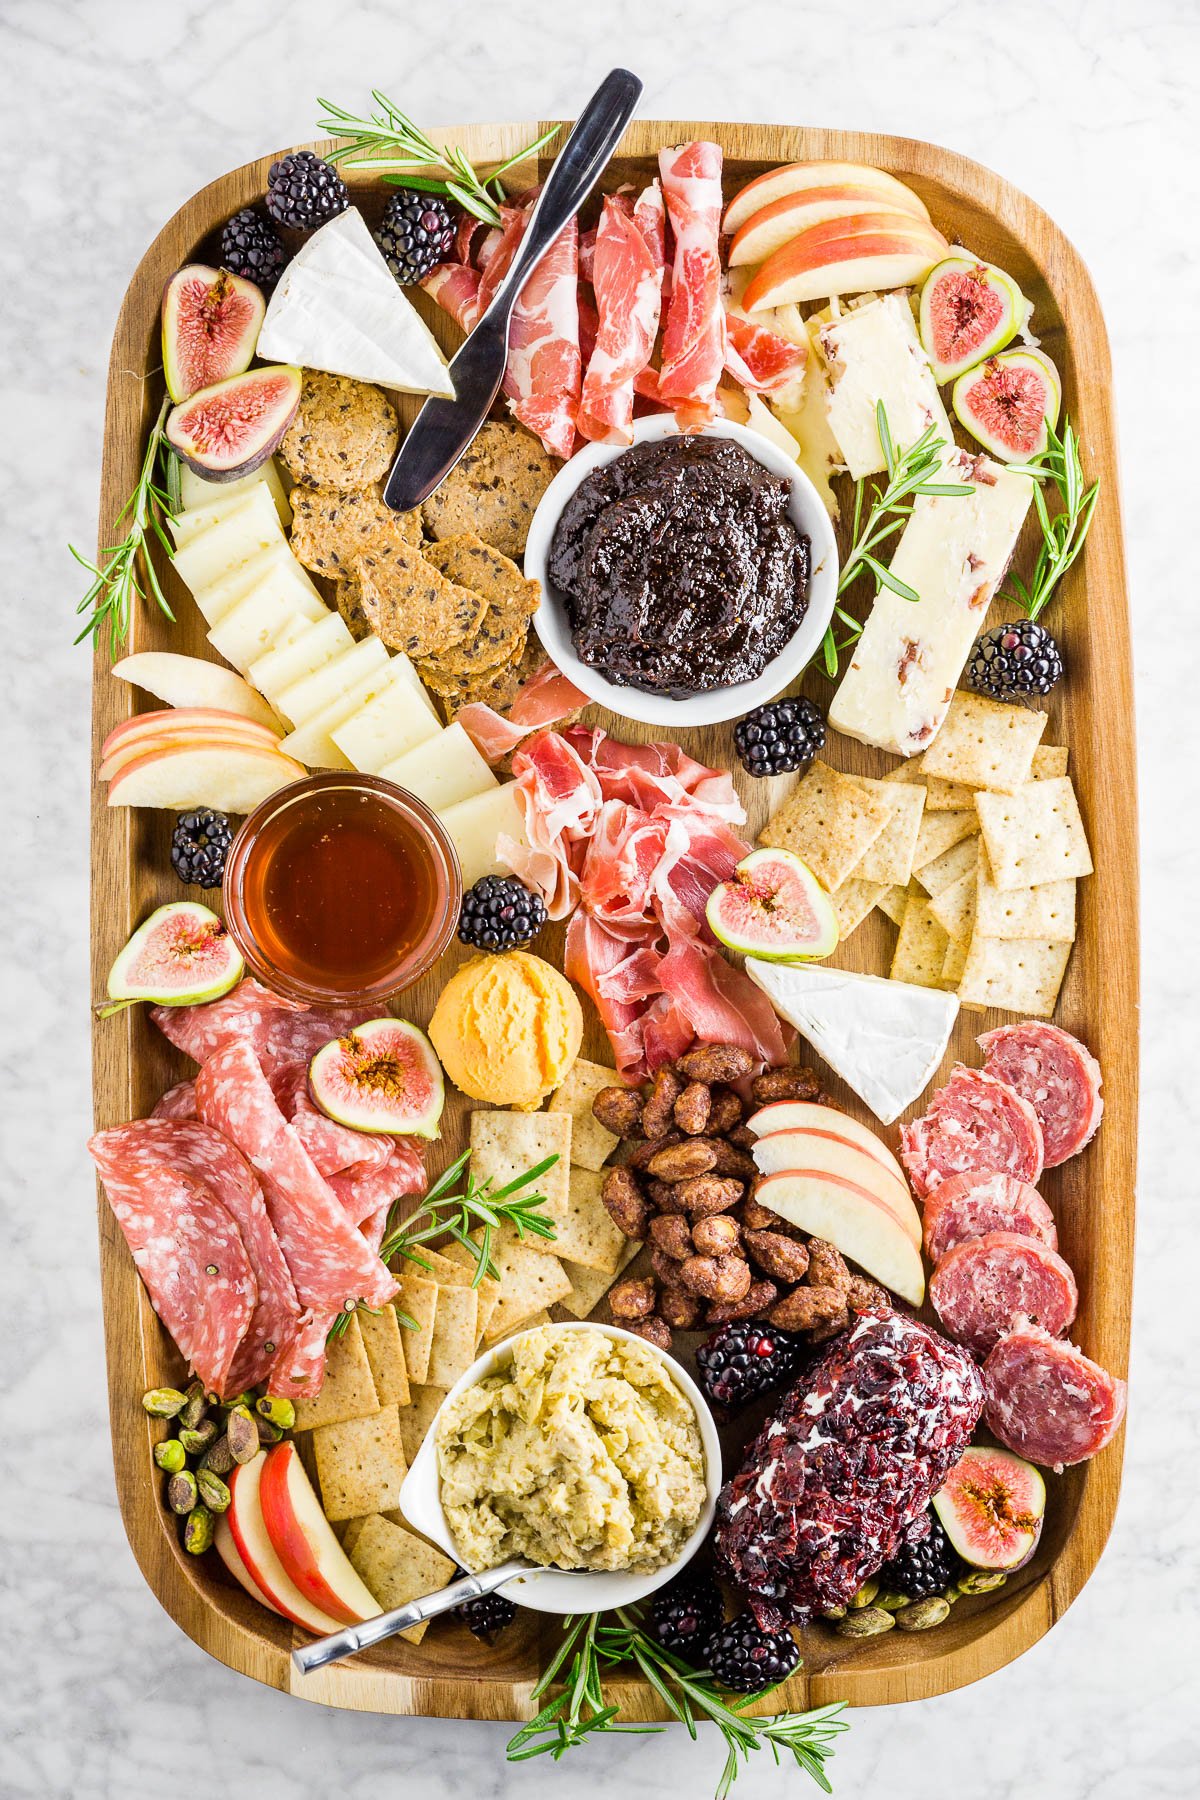 A fall inspired charcuterie board with various cheese, meats, dips, nuts and crackers.